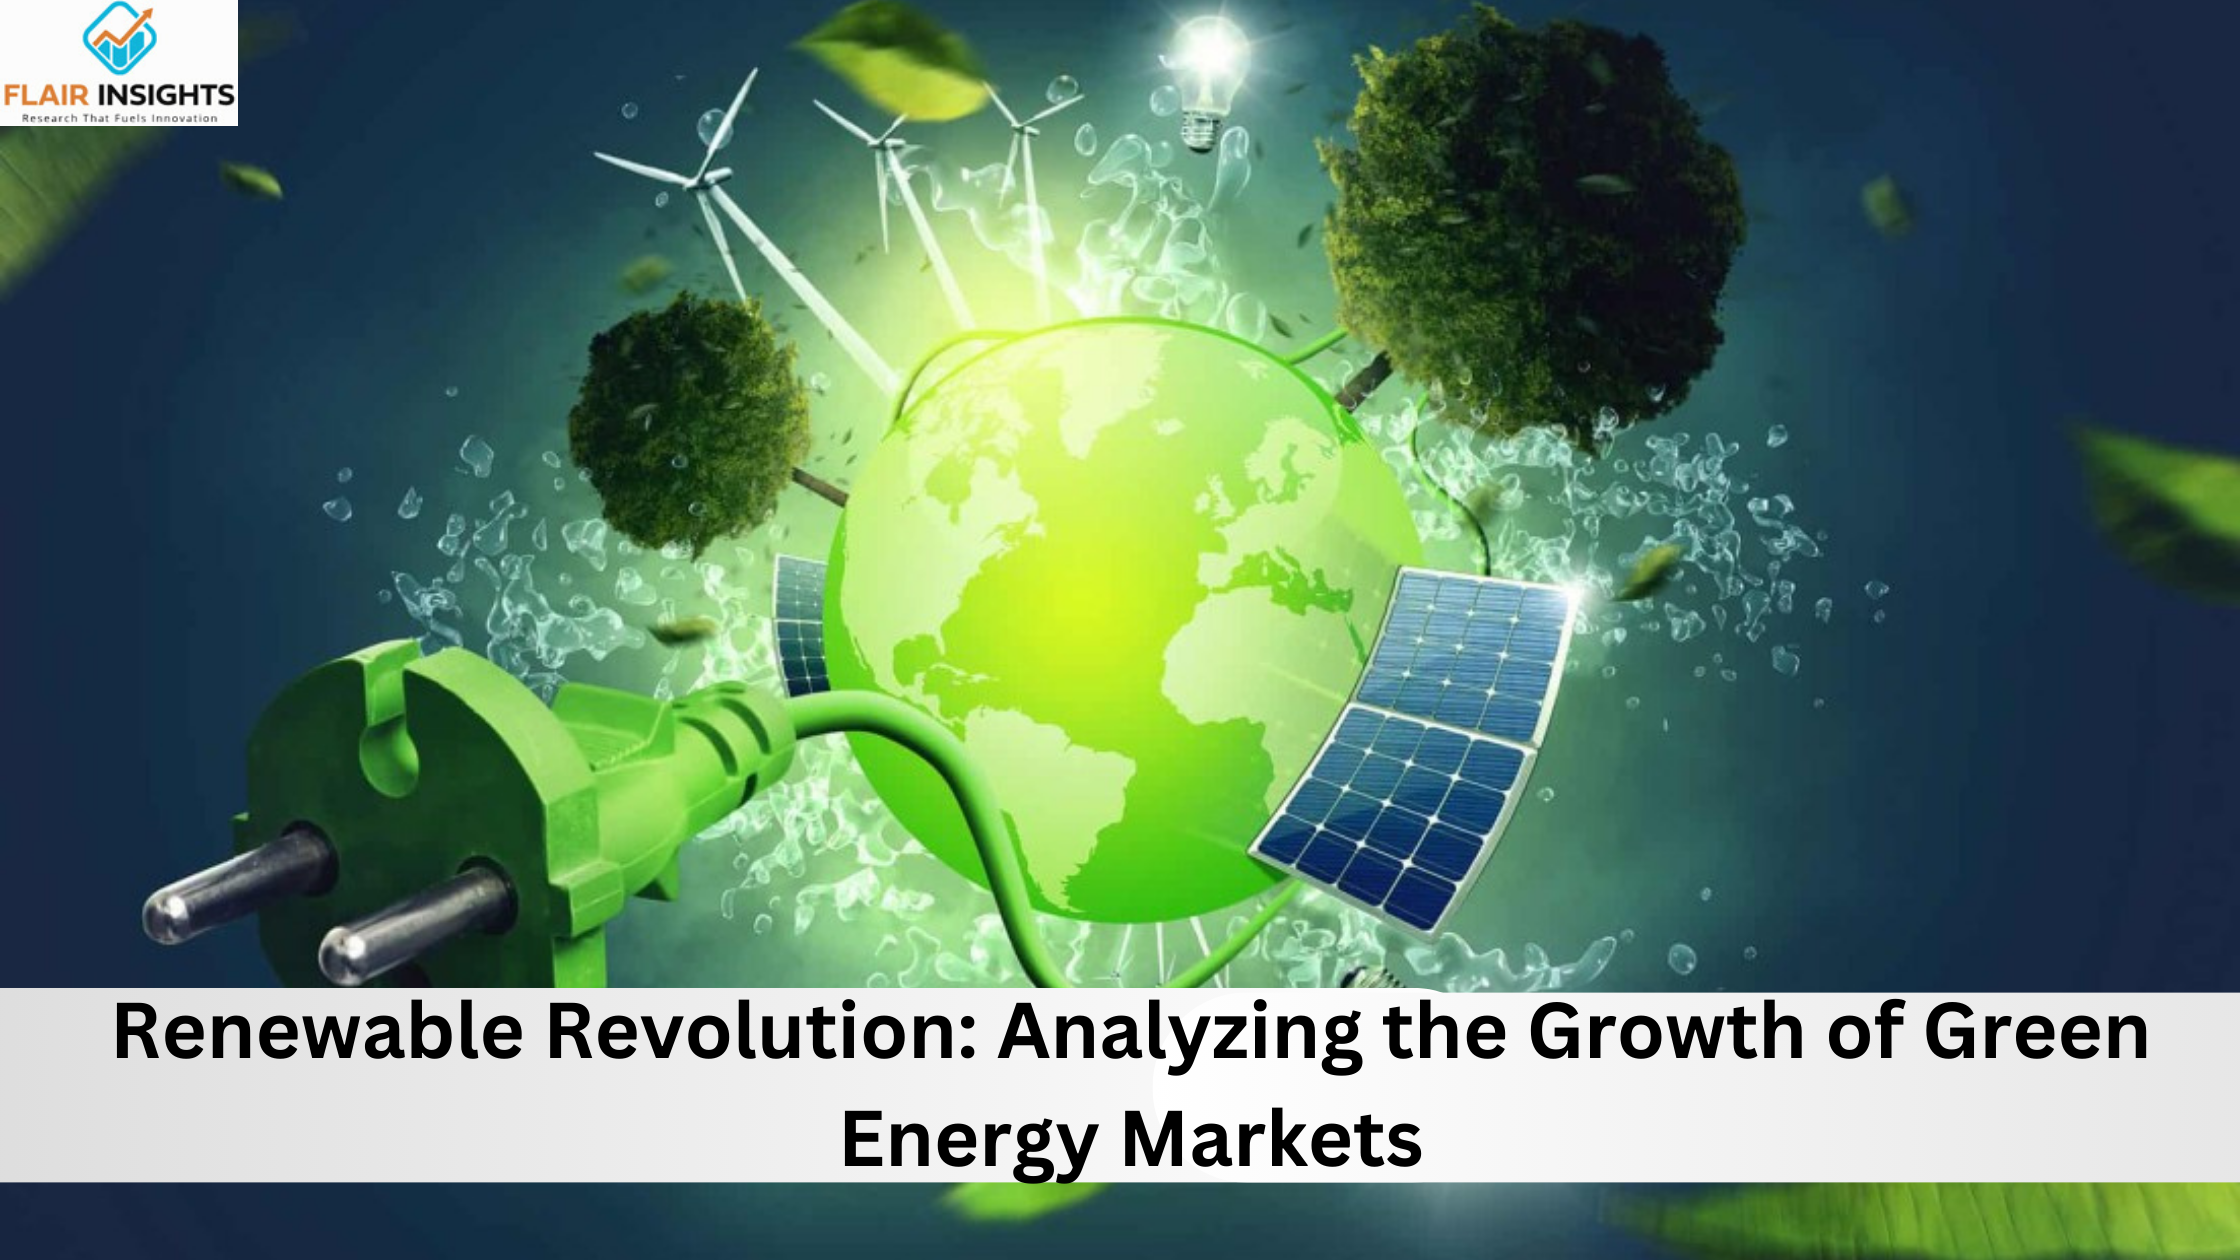 Renewable Revolution: Analyzing the Growth of Green Energy Markets